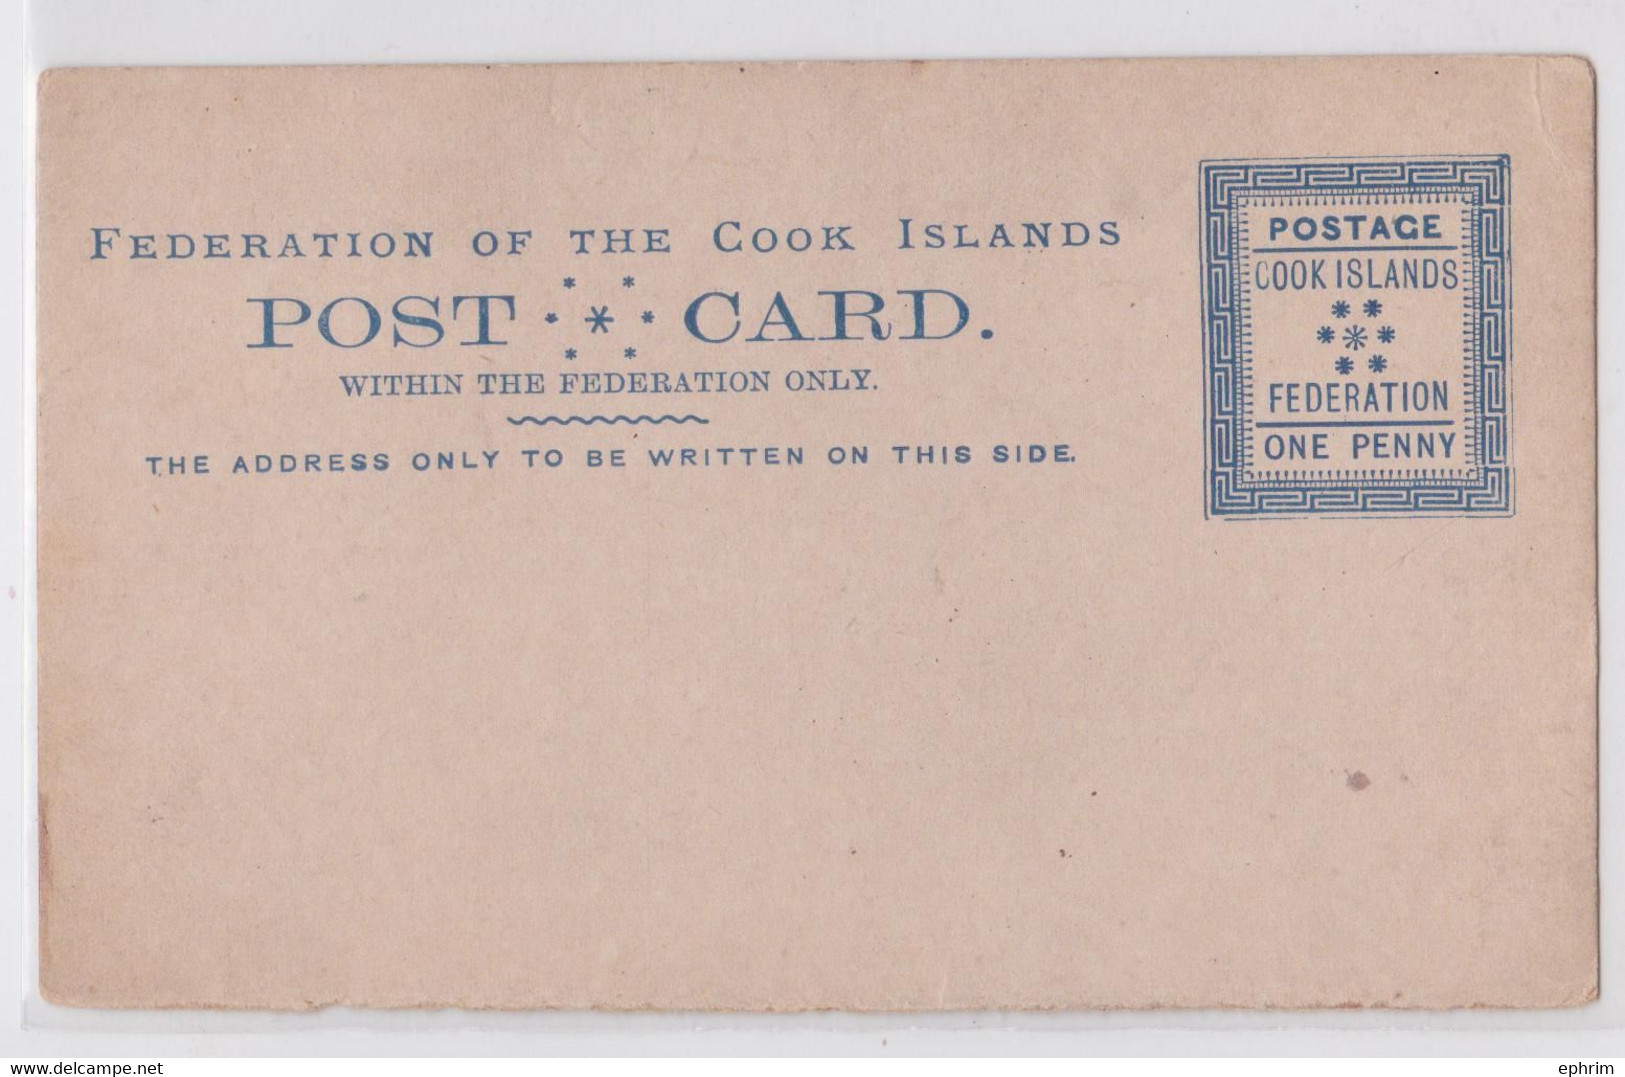 COOK ISLANDS FEDERATION ONE PENNY POSTAL STATIONERY POST CARD ENTIER CARTE POSTALE ÎLES COOK PS EP - Cook Islands